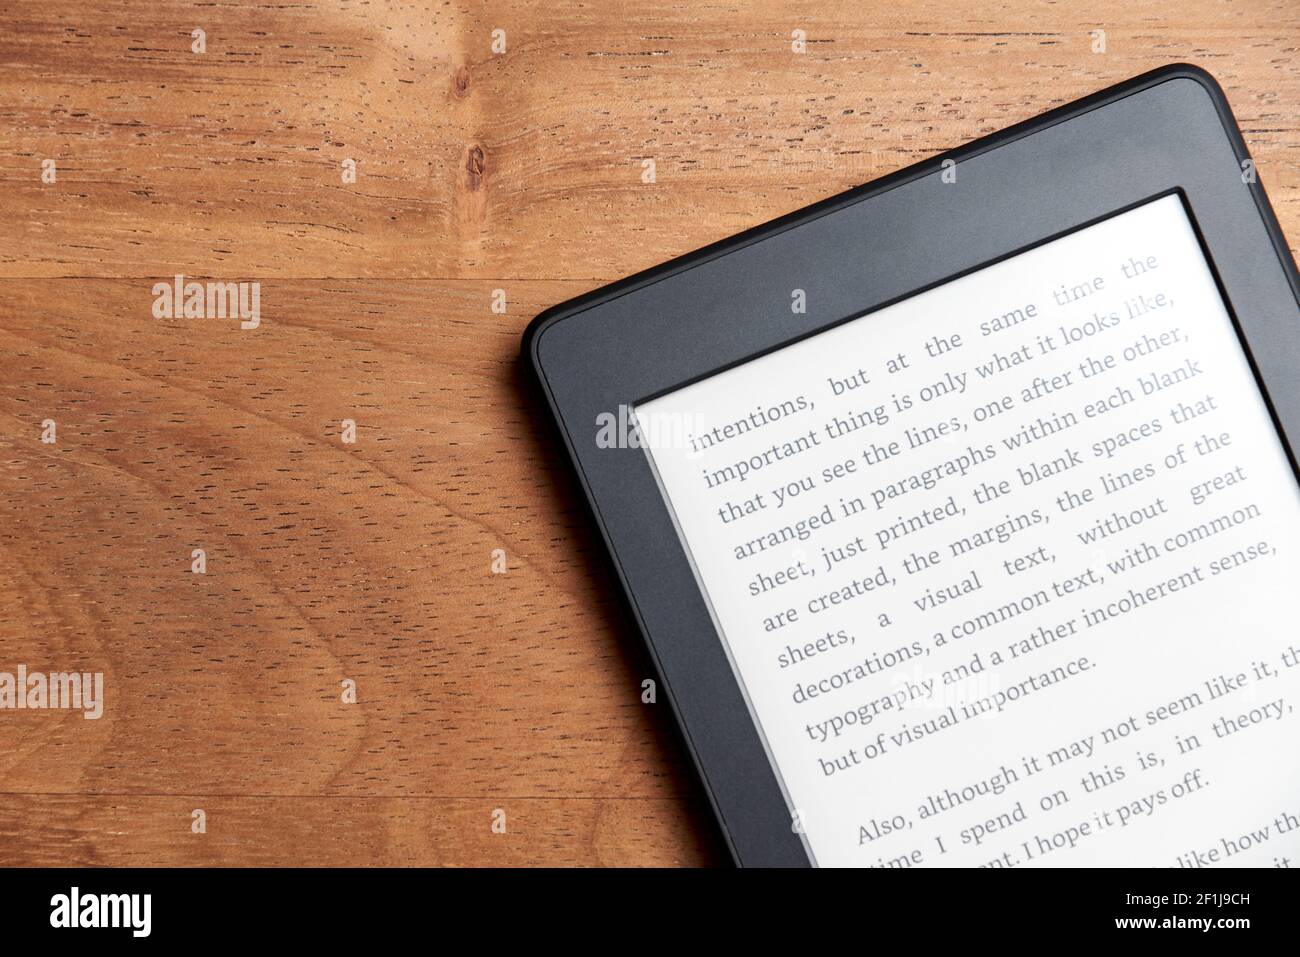 Closeup image of an electronic reader with blank screen on a wooden surface. Concepts of technology and modernity. Image with copy space. Stock Photo